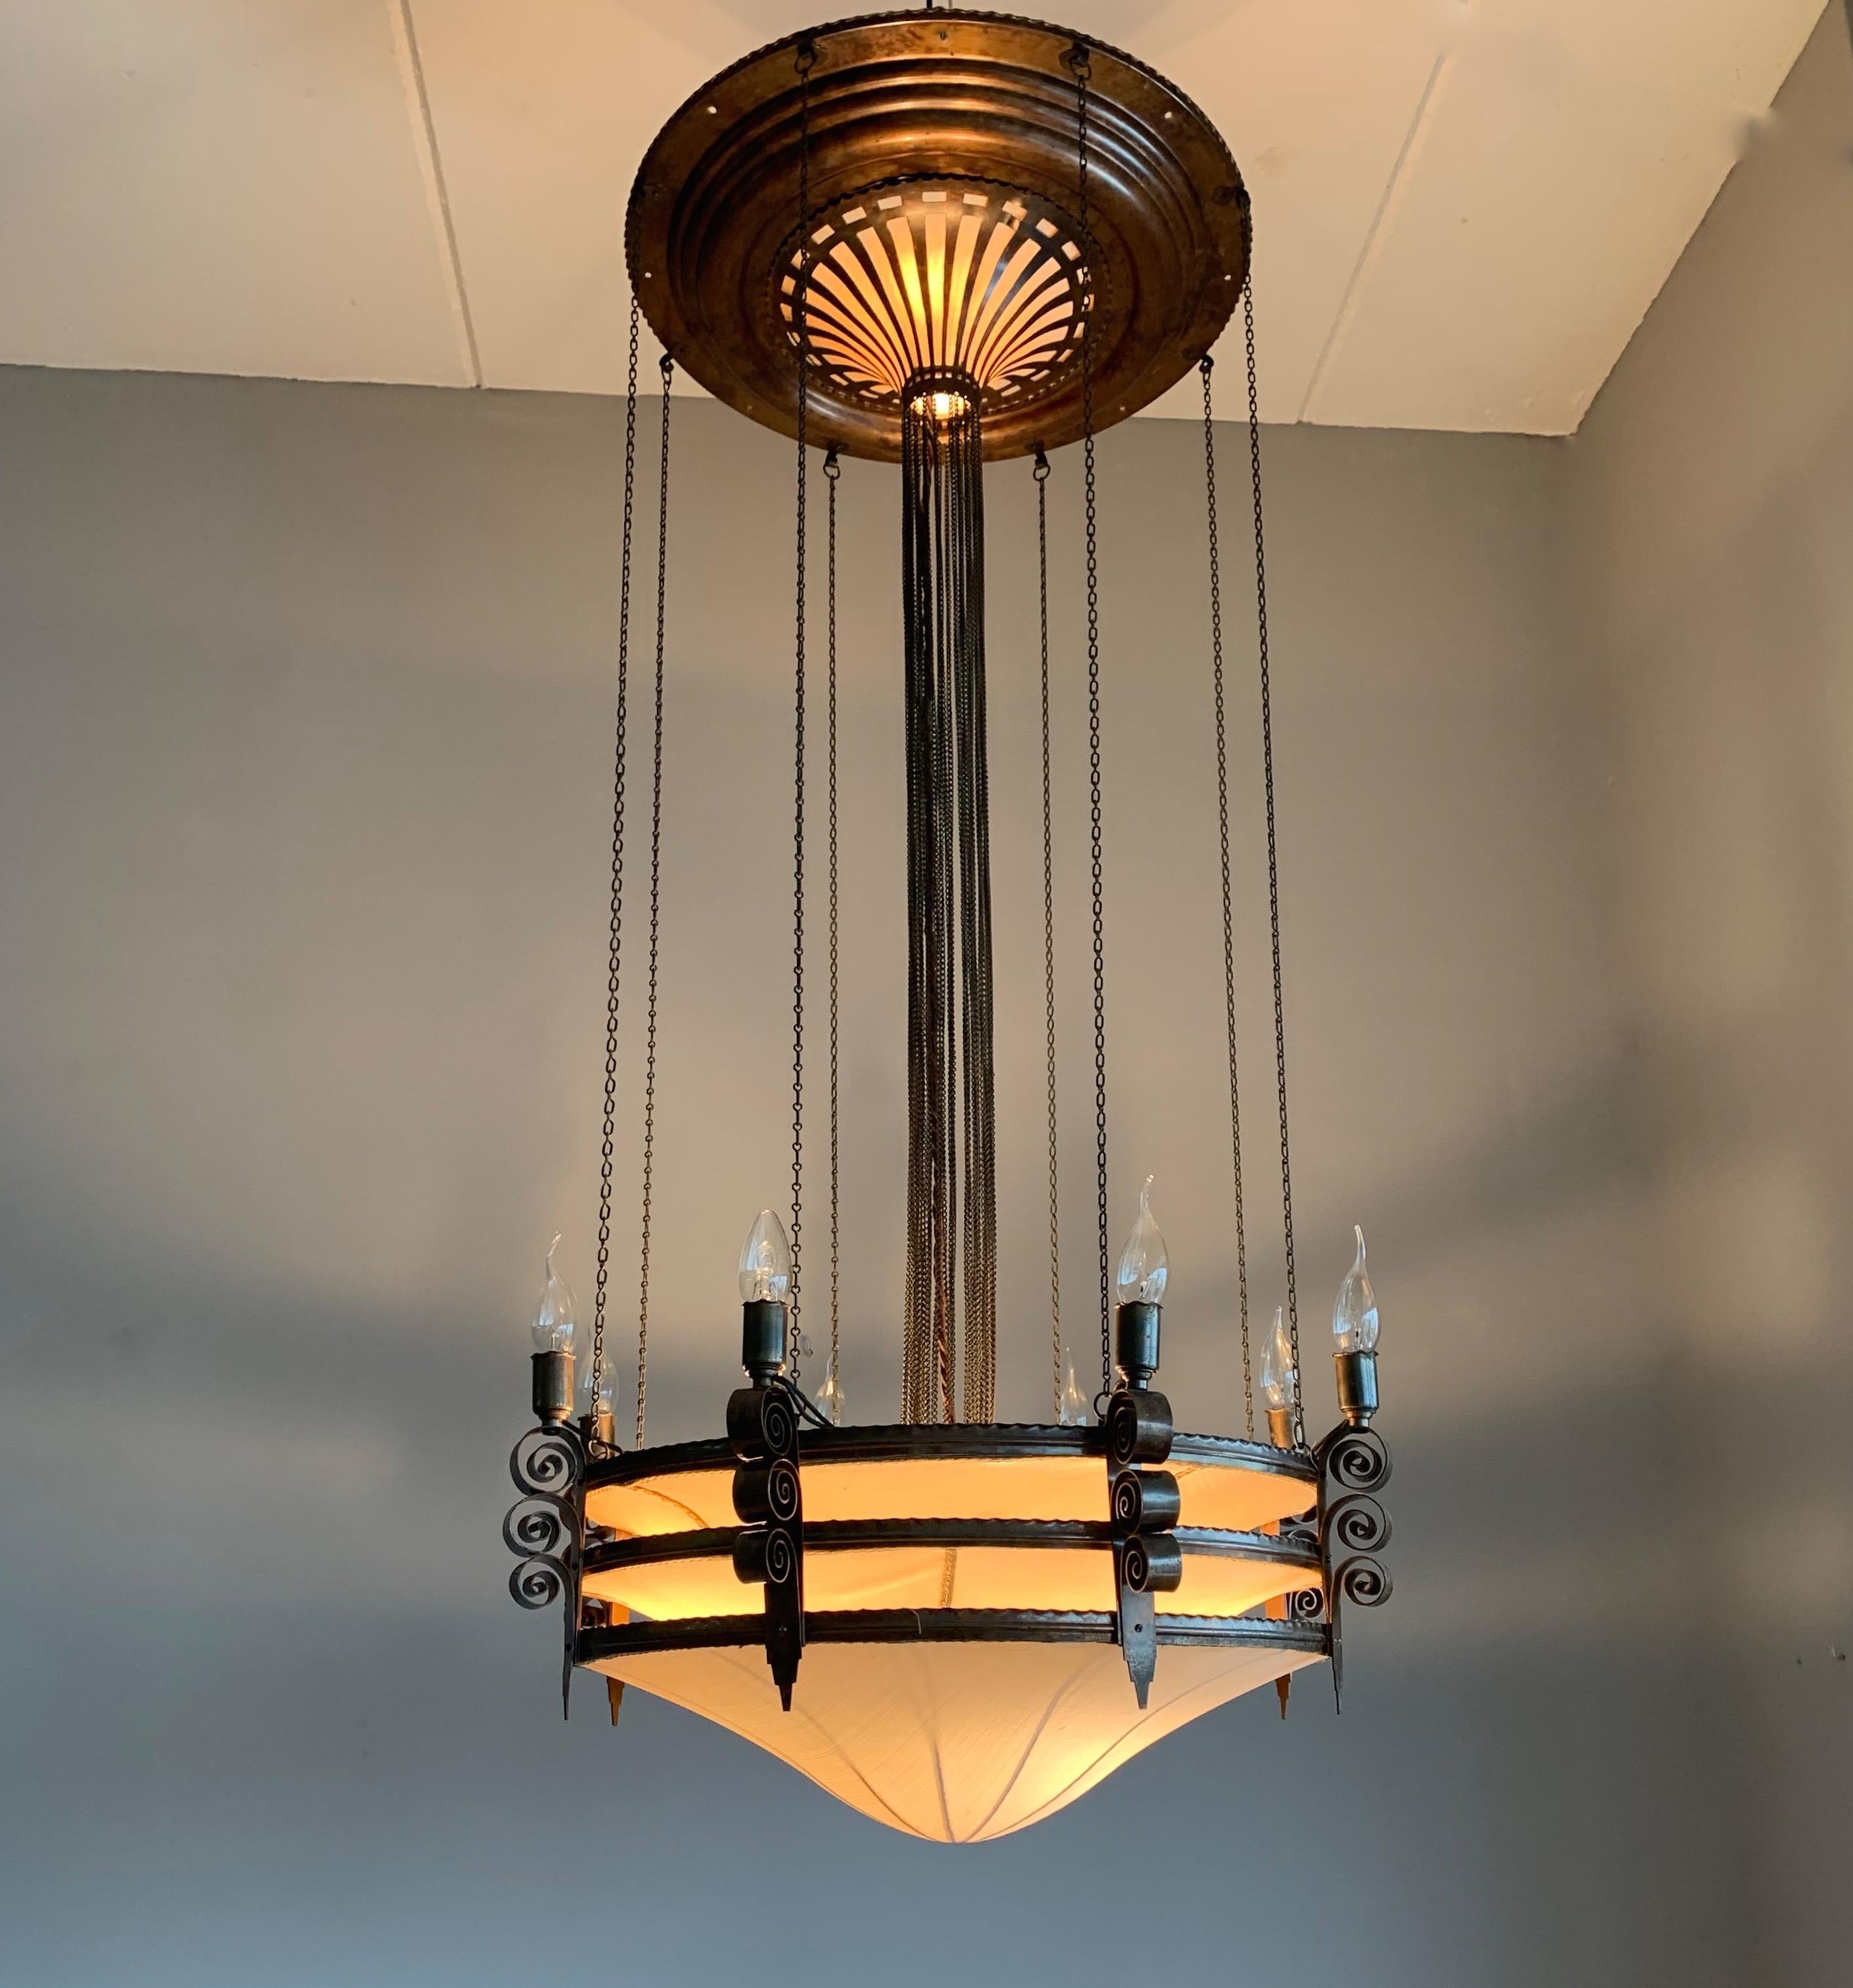 This large, striking and rare 12-light chandelier is part of an even rarer set of 4 fixtures.

If you live or work in an Arts & Crafts (inspired) building and you are looking for the perfect fixture to grace your living or work space then this very